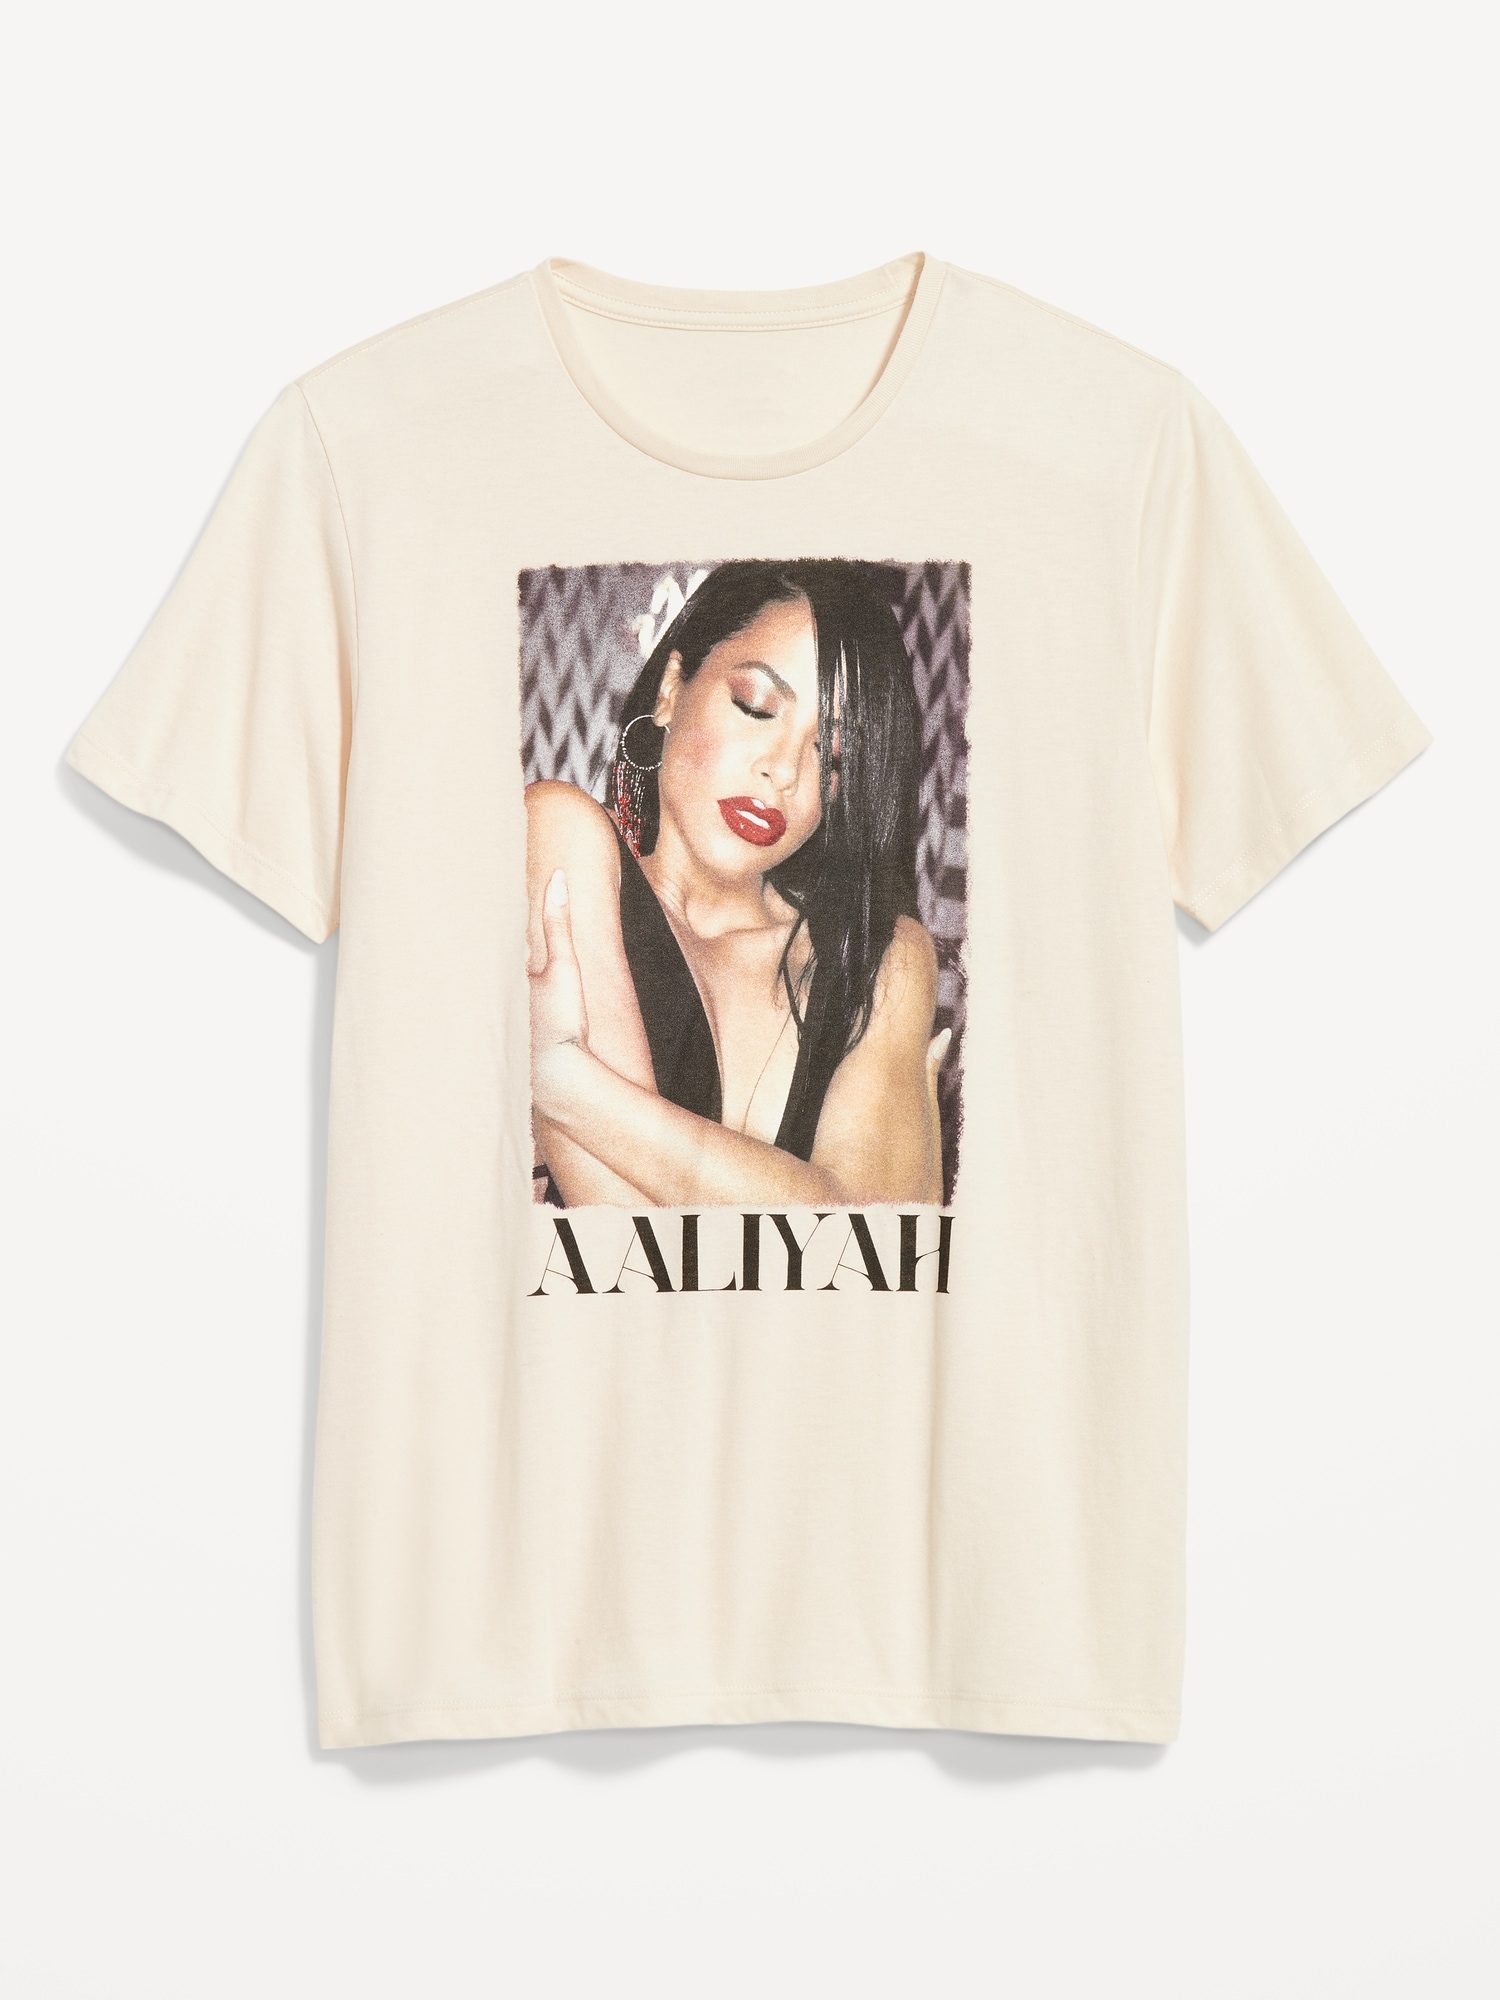 Aaliyah™ Gender-Neutral T-Shirt for Adults